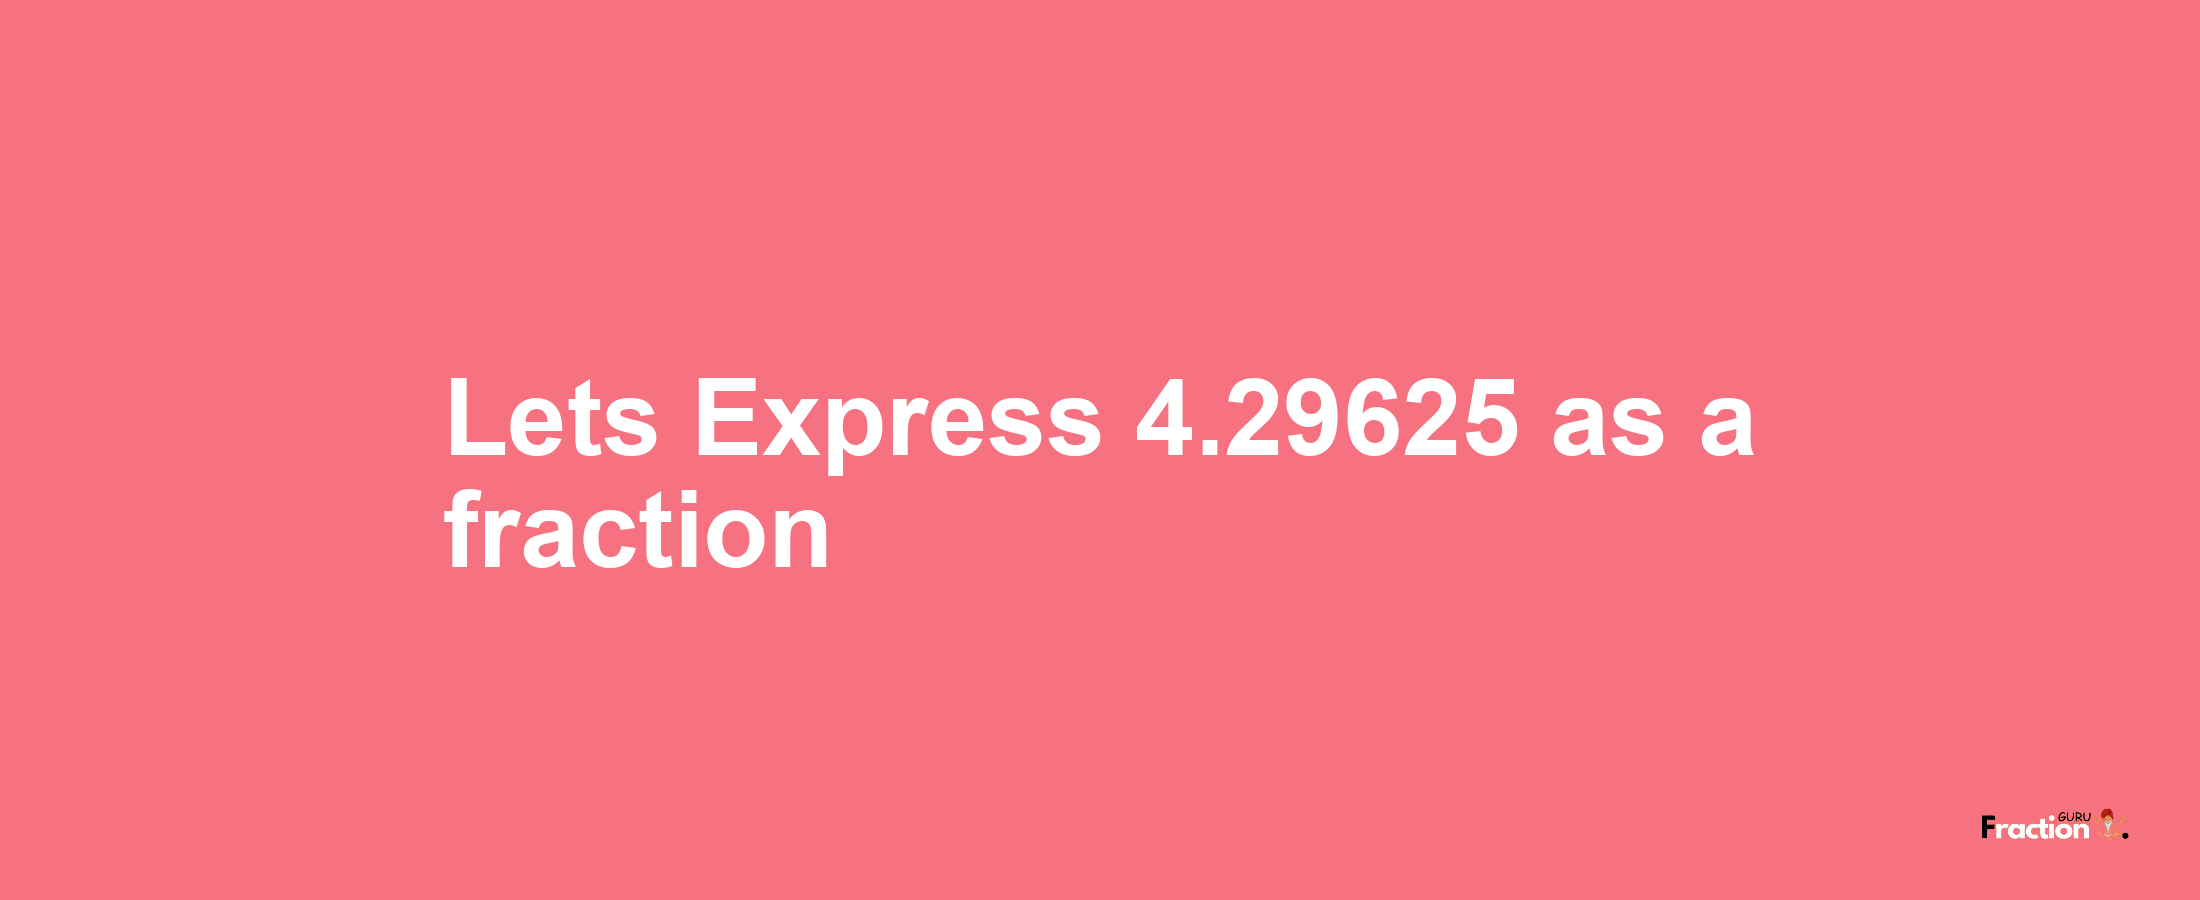 Lets Express 4.29625 as afraction